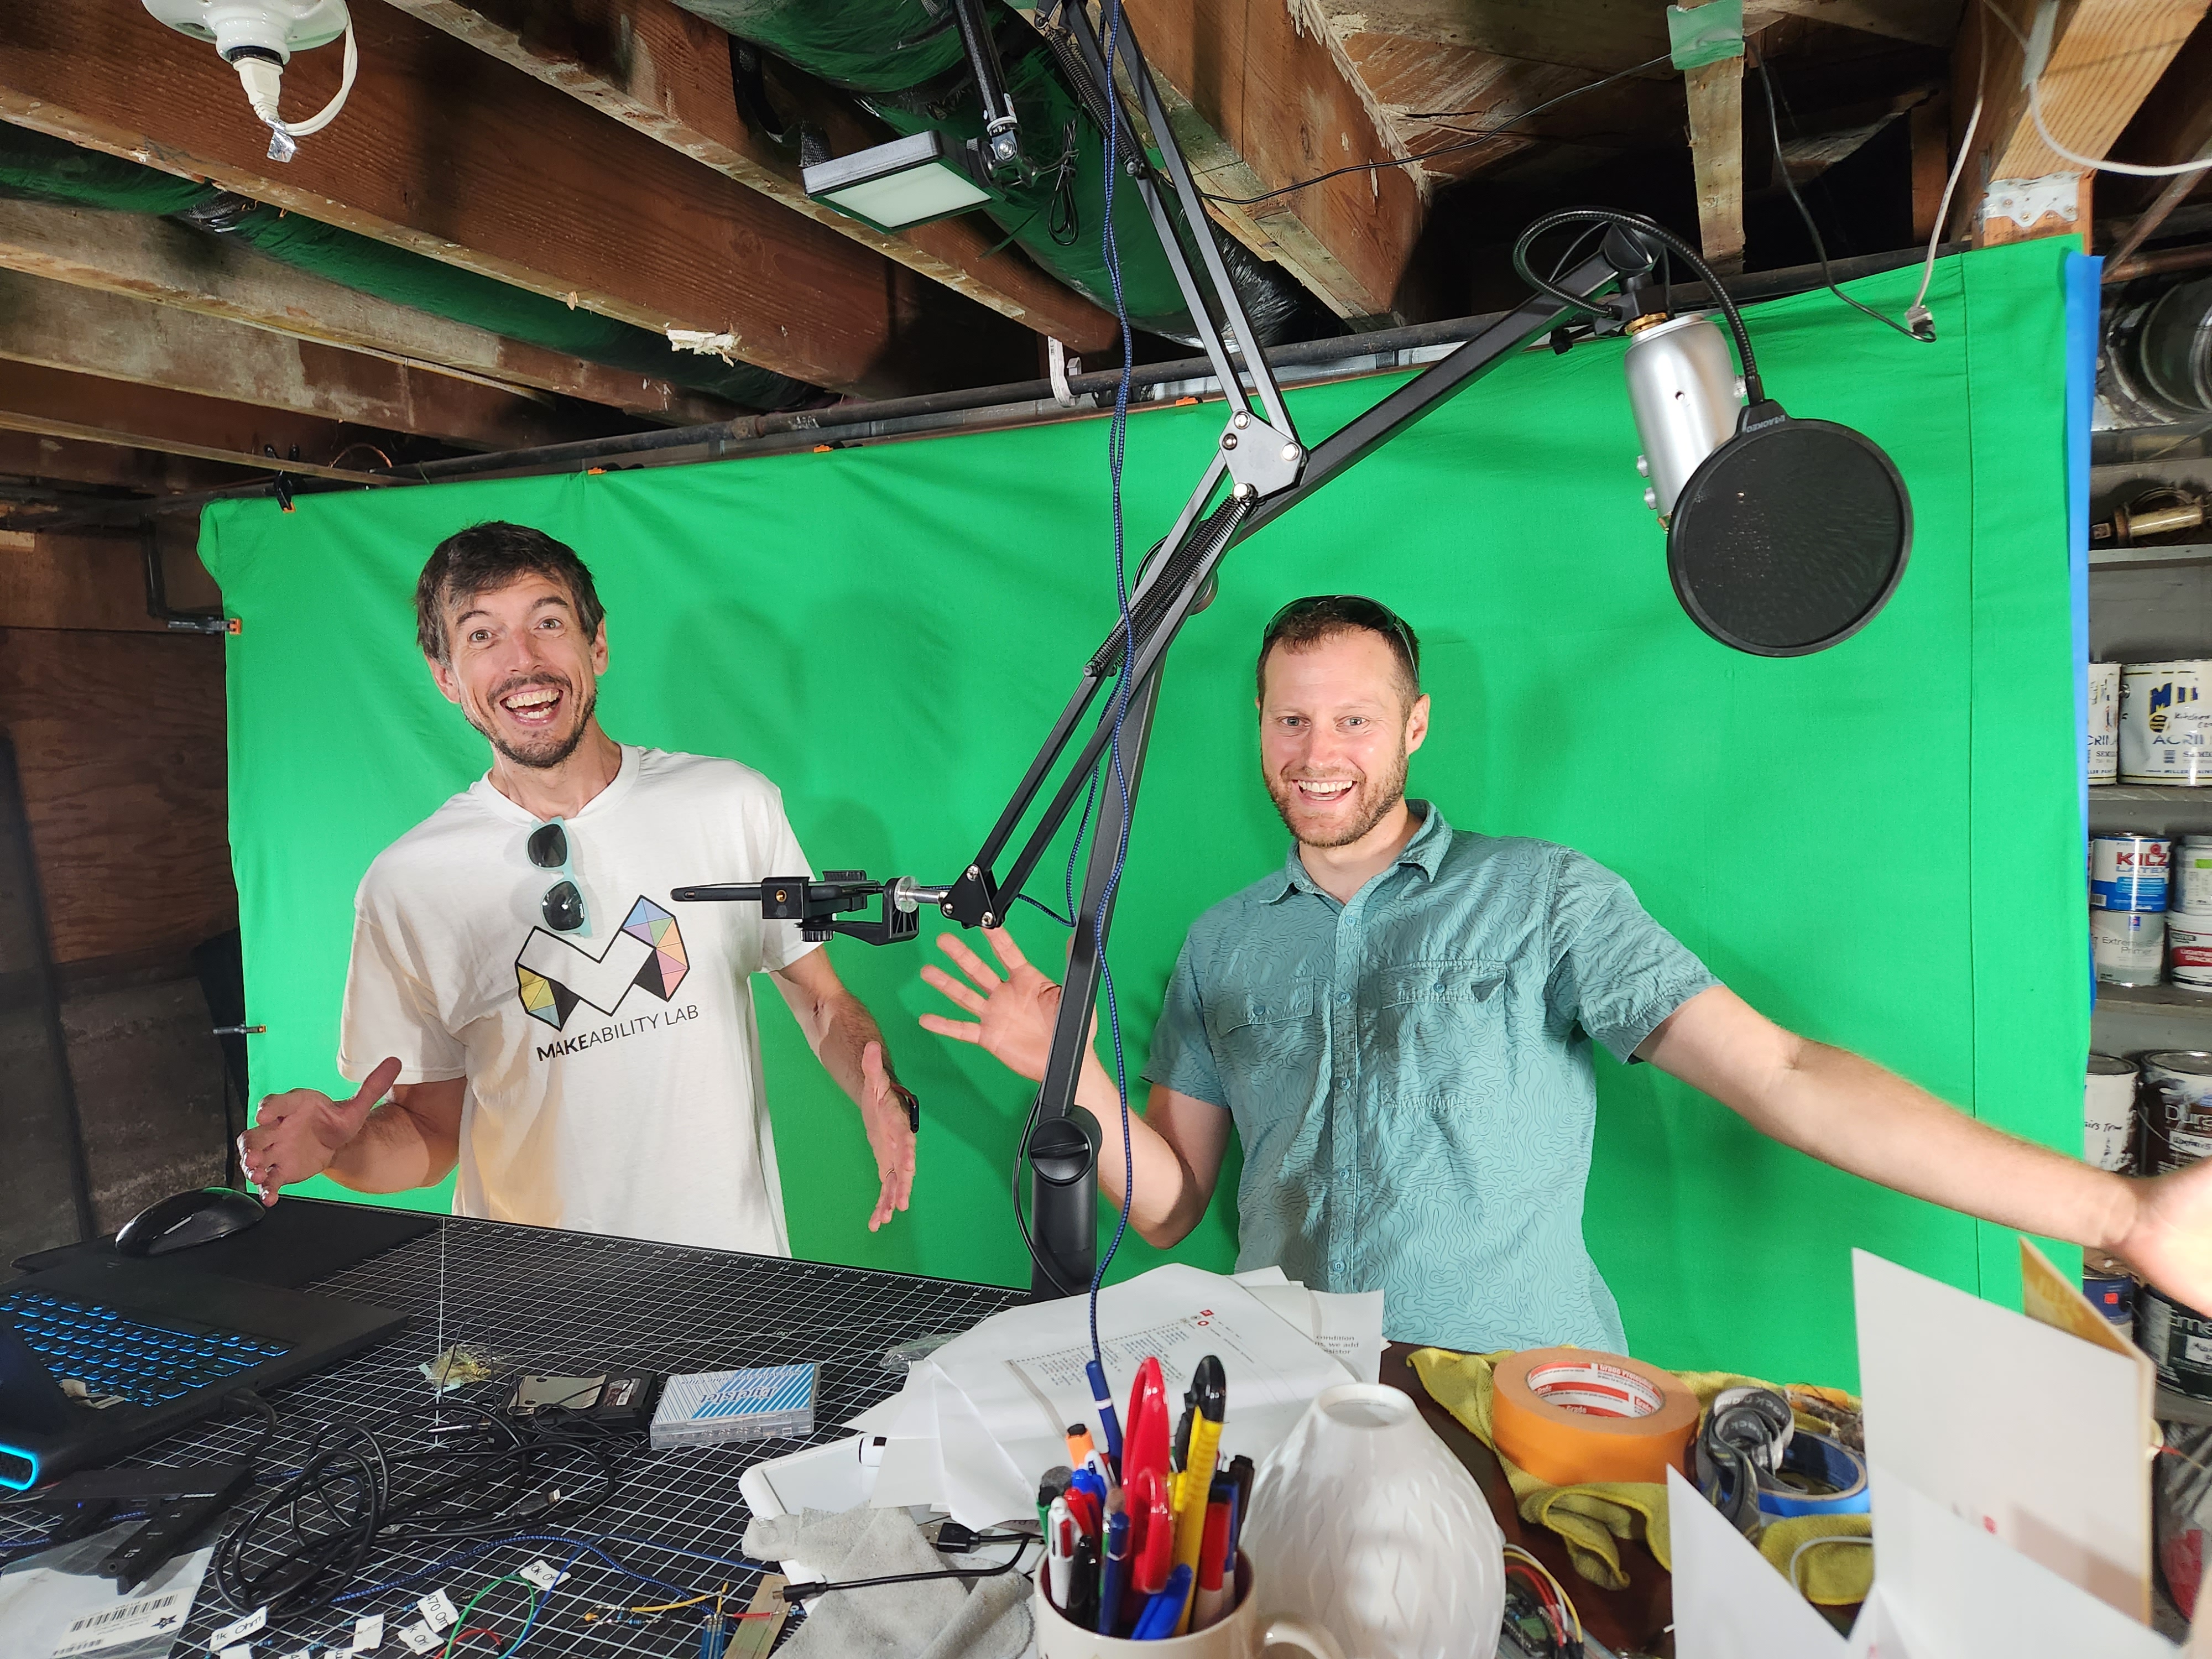 Jon and Brent standing in front of Jon's green screen and making funny gestures/faces